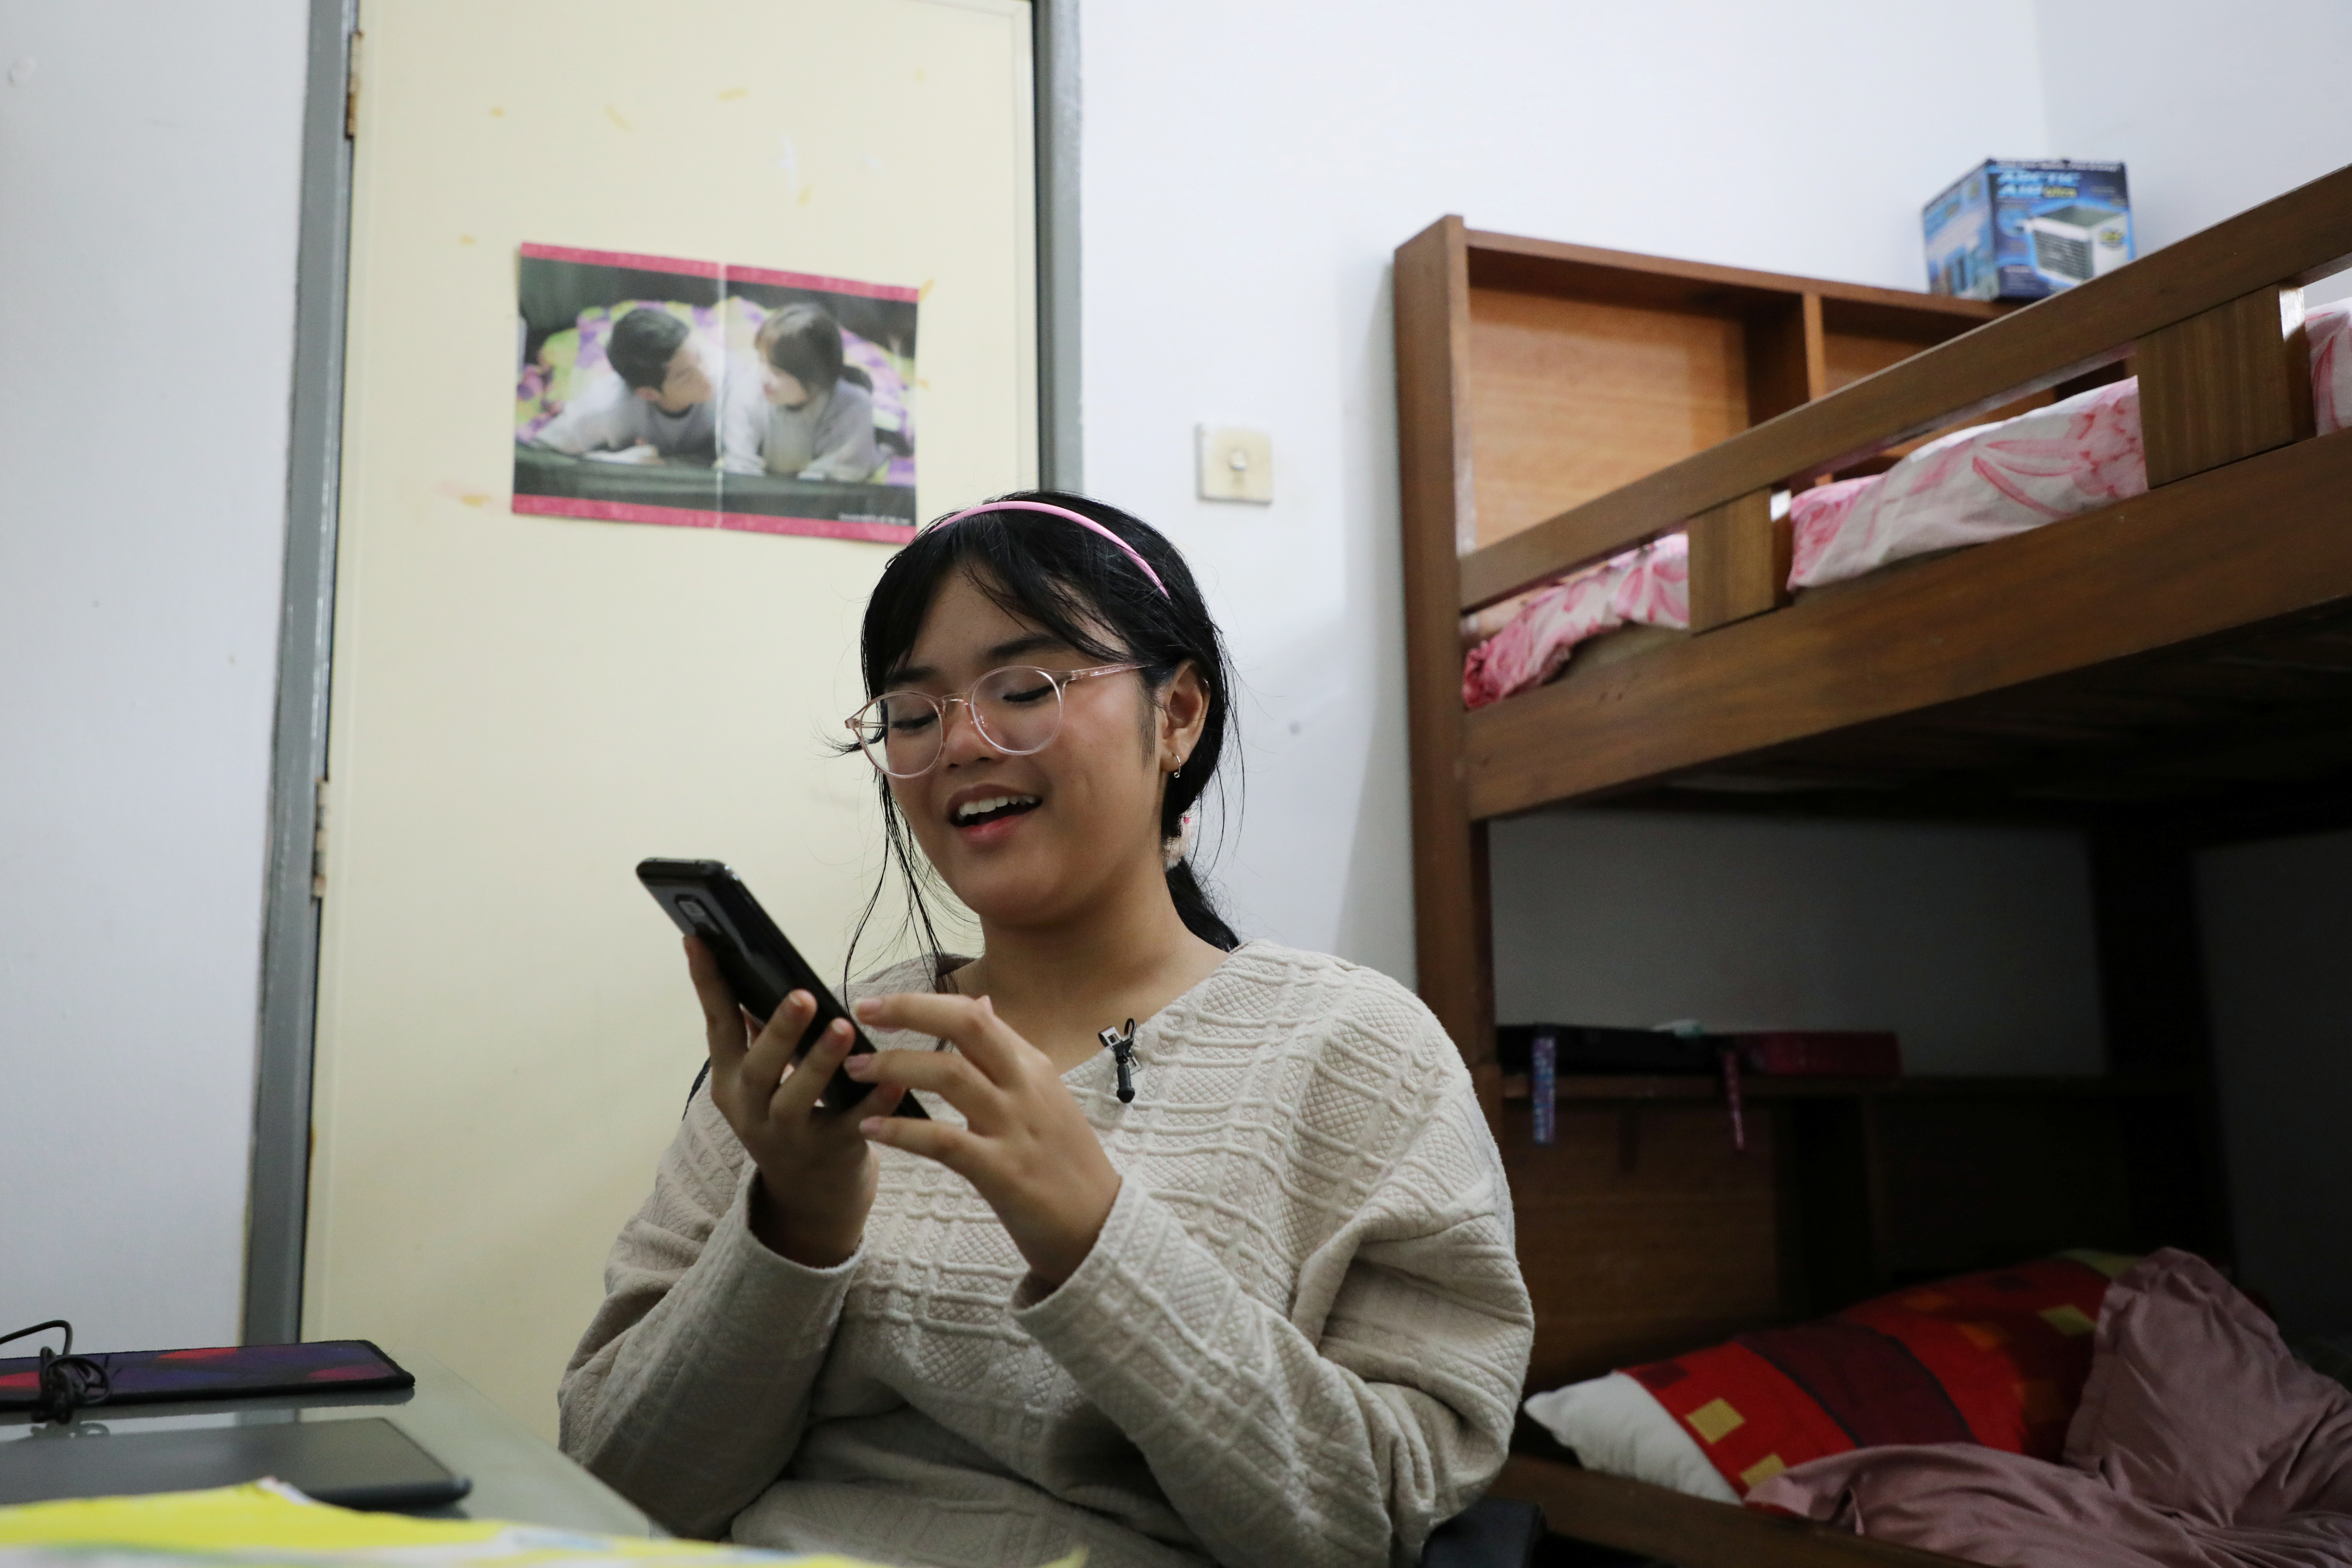 Malaysian teenager Ain Husniza Saiful Nizam uses her phone to check on the comments towards her TikTok video in her bedroom in Kuala Selangor